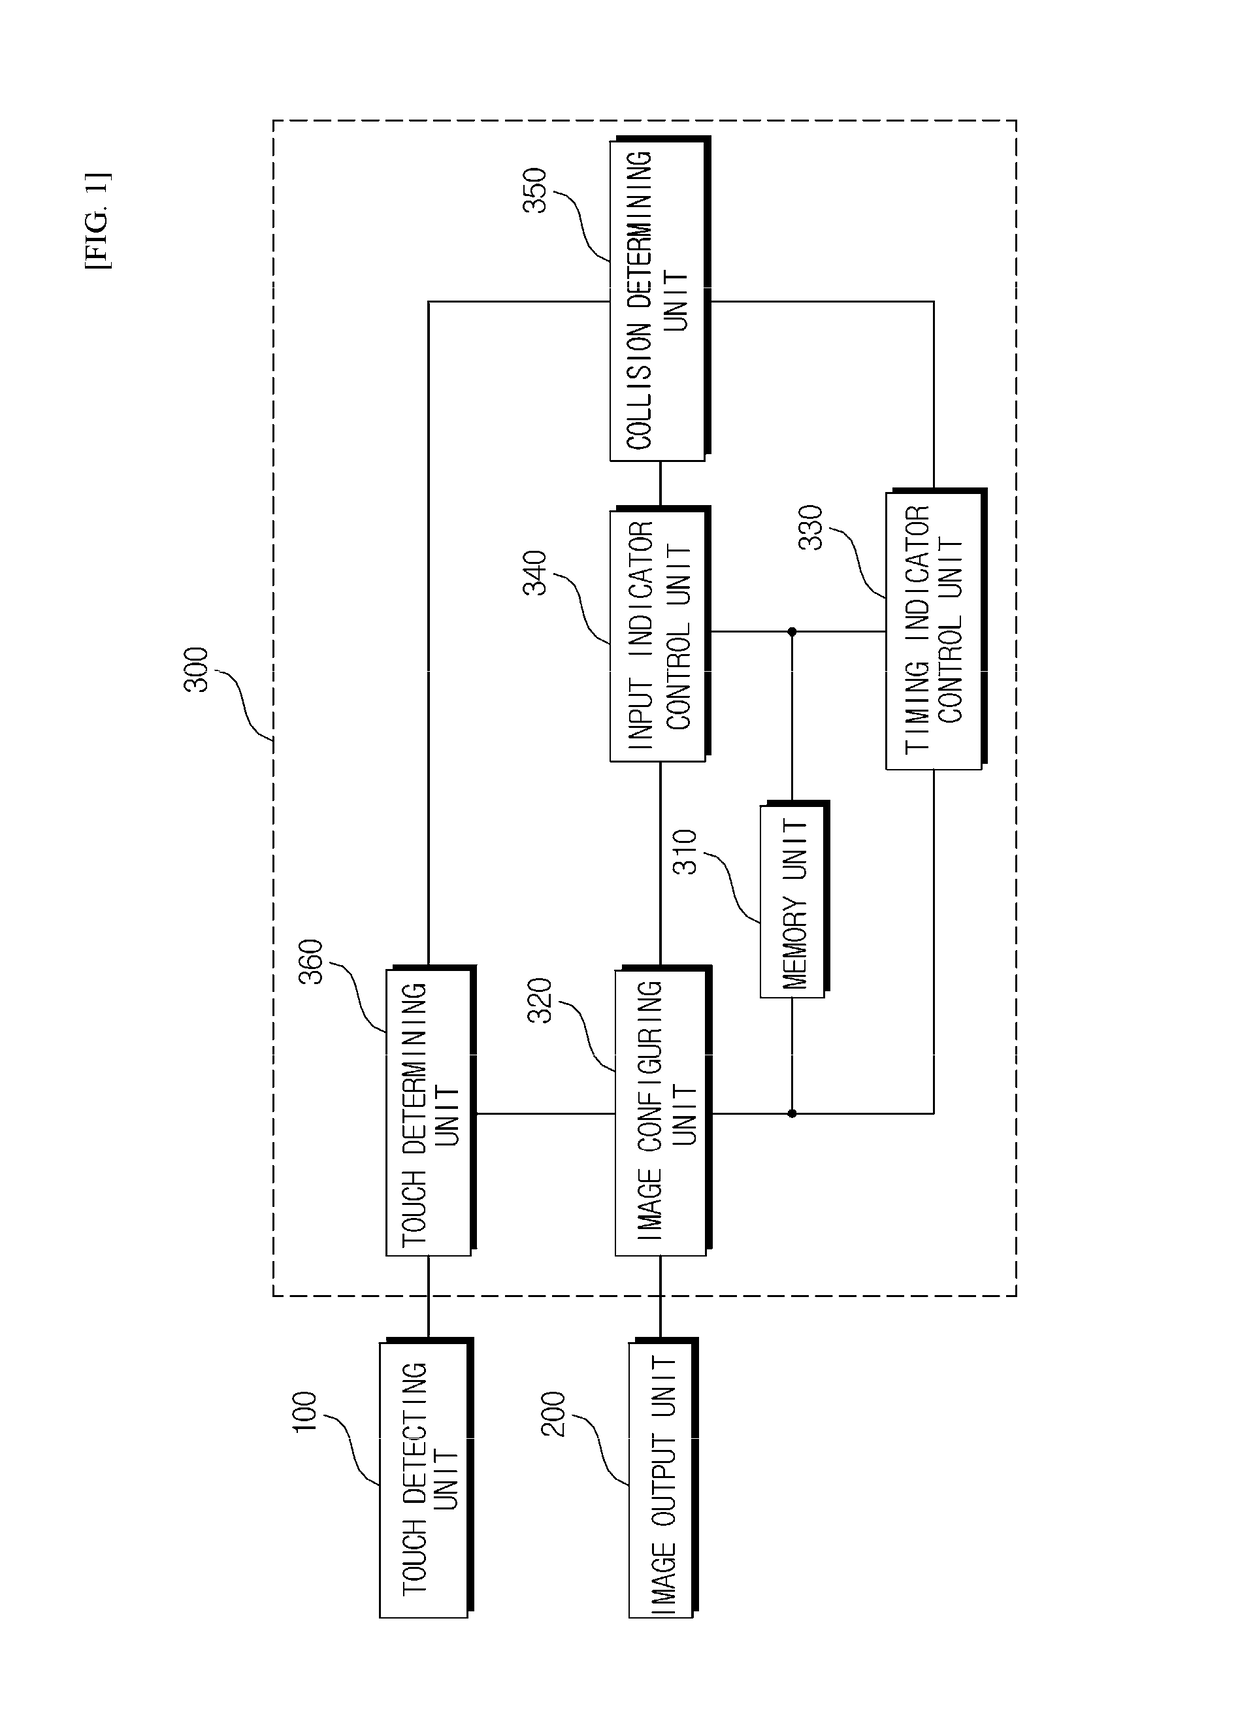 Apparatus and method of providing timing game based on touch